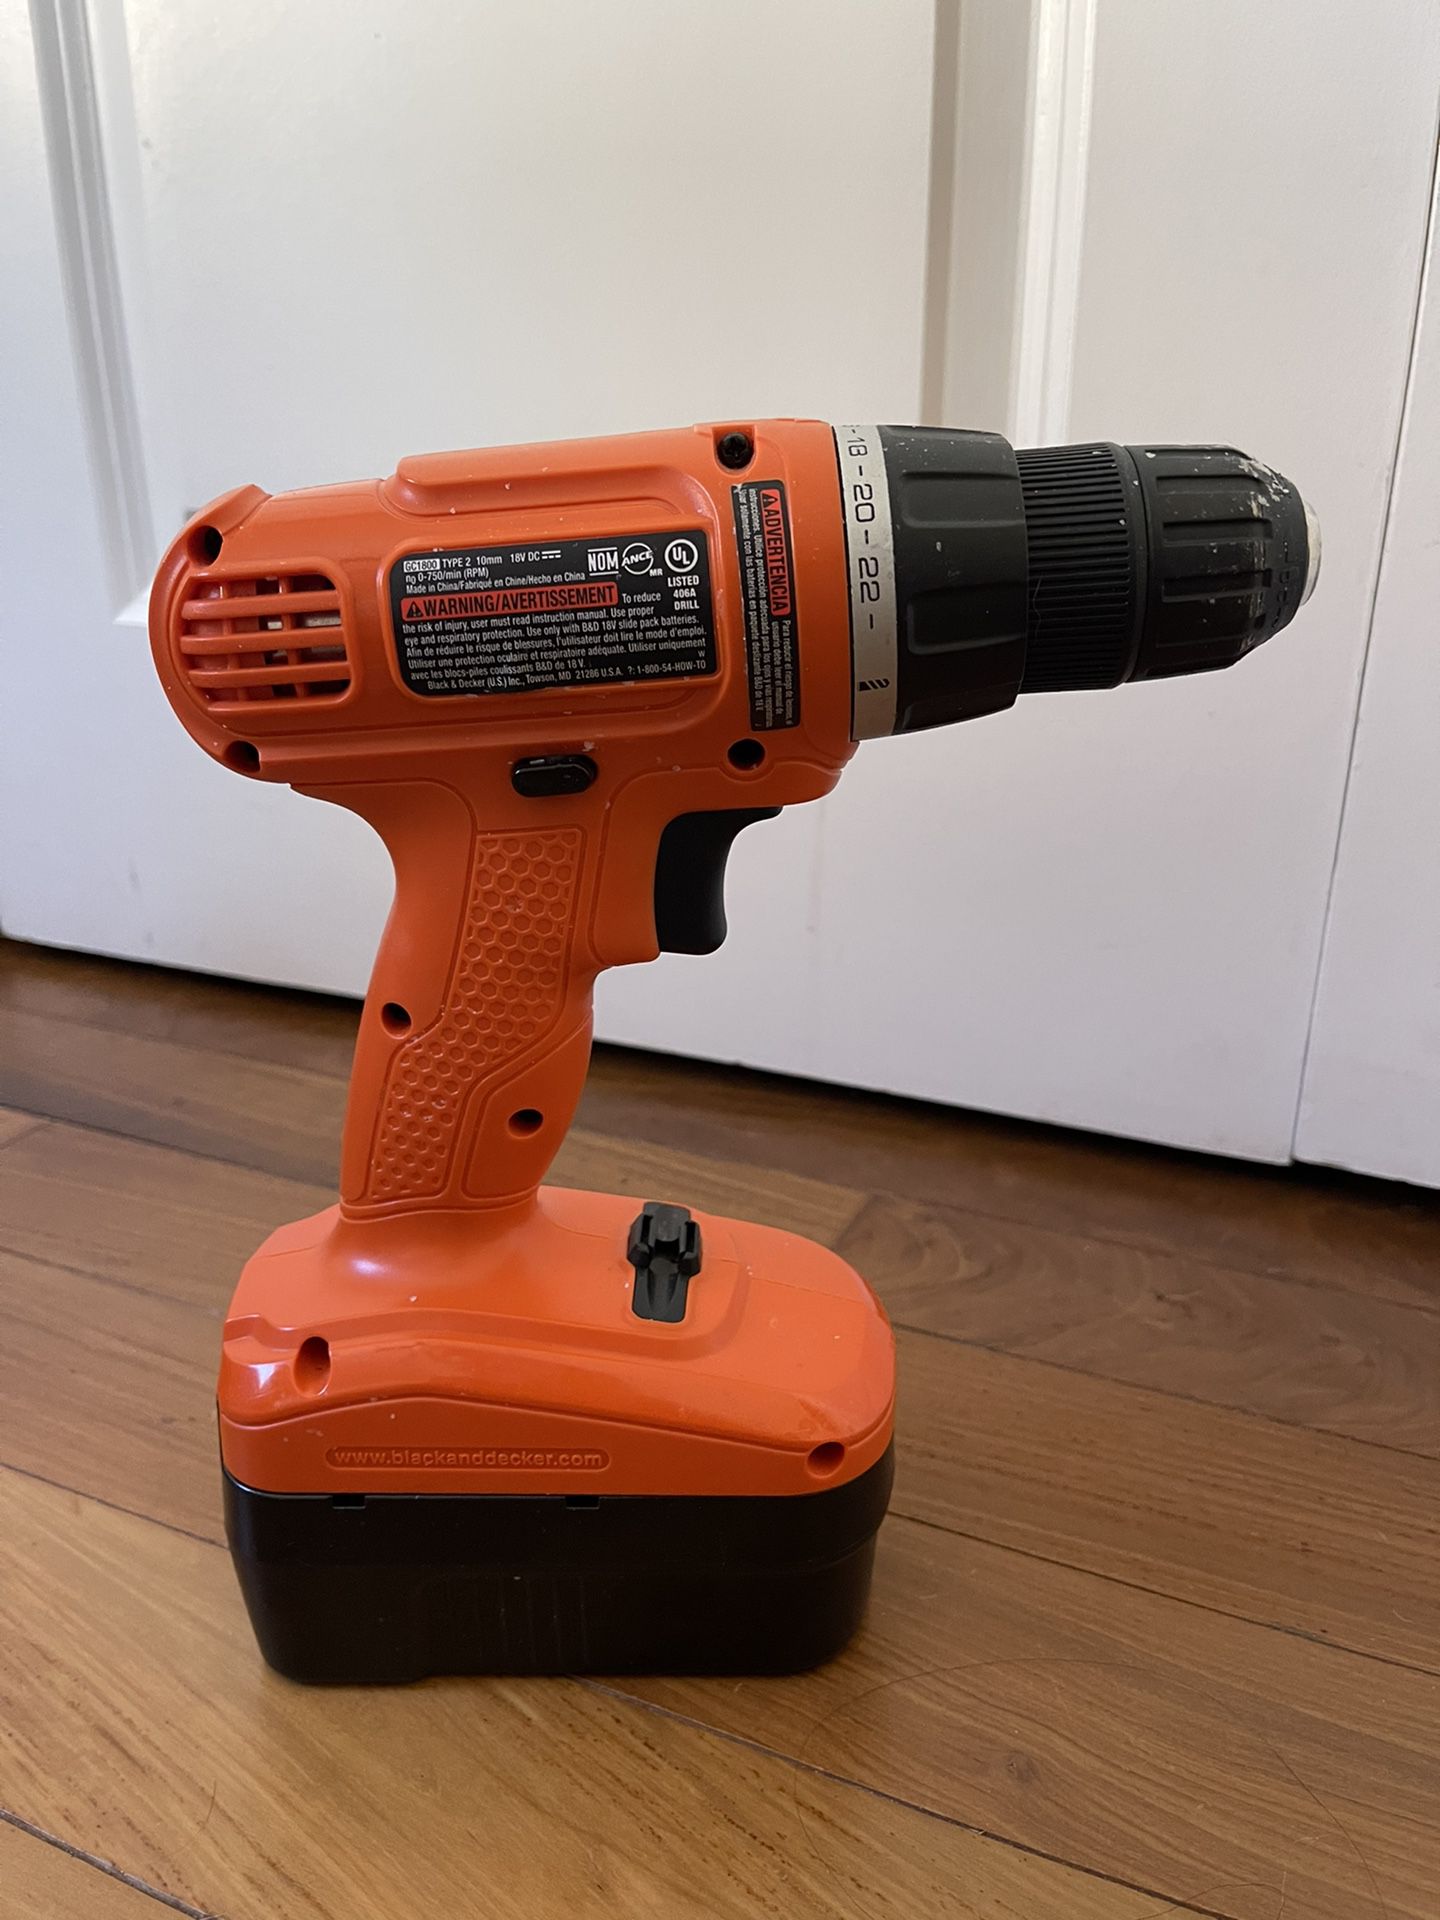 Black & Decker 18v Cordless Drill Gc1800 With Battery Charger for